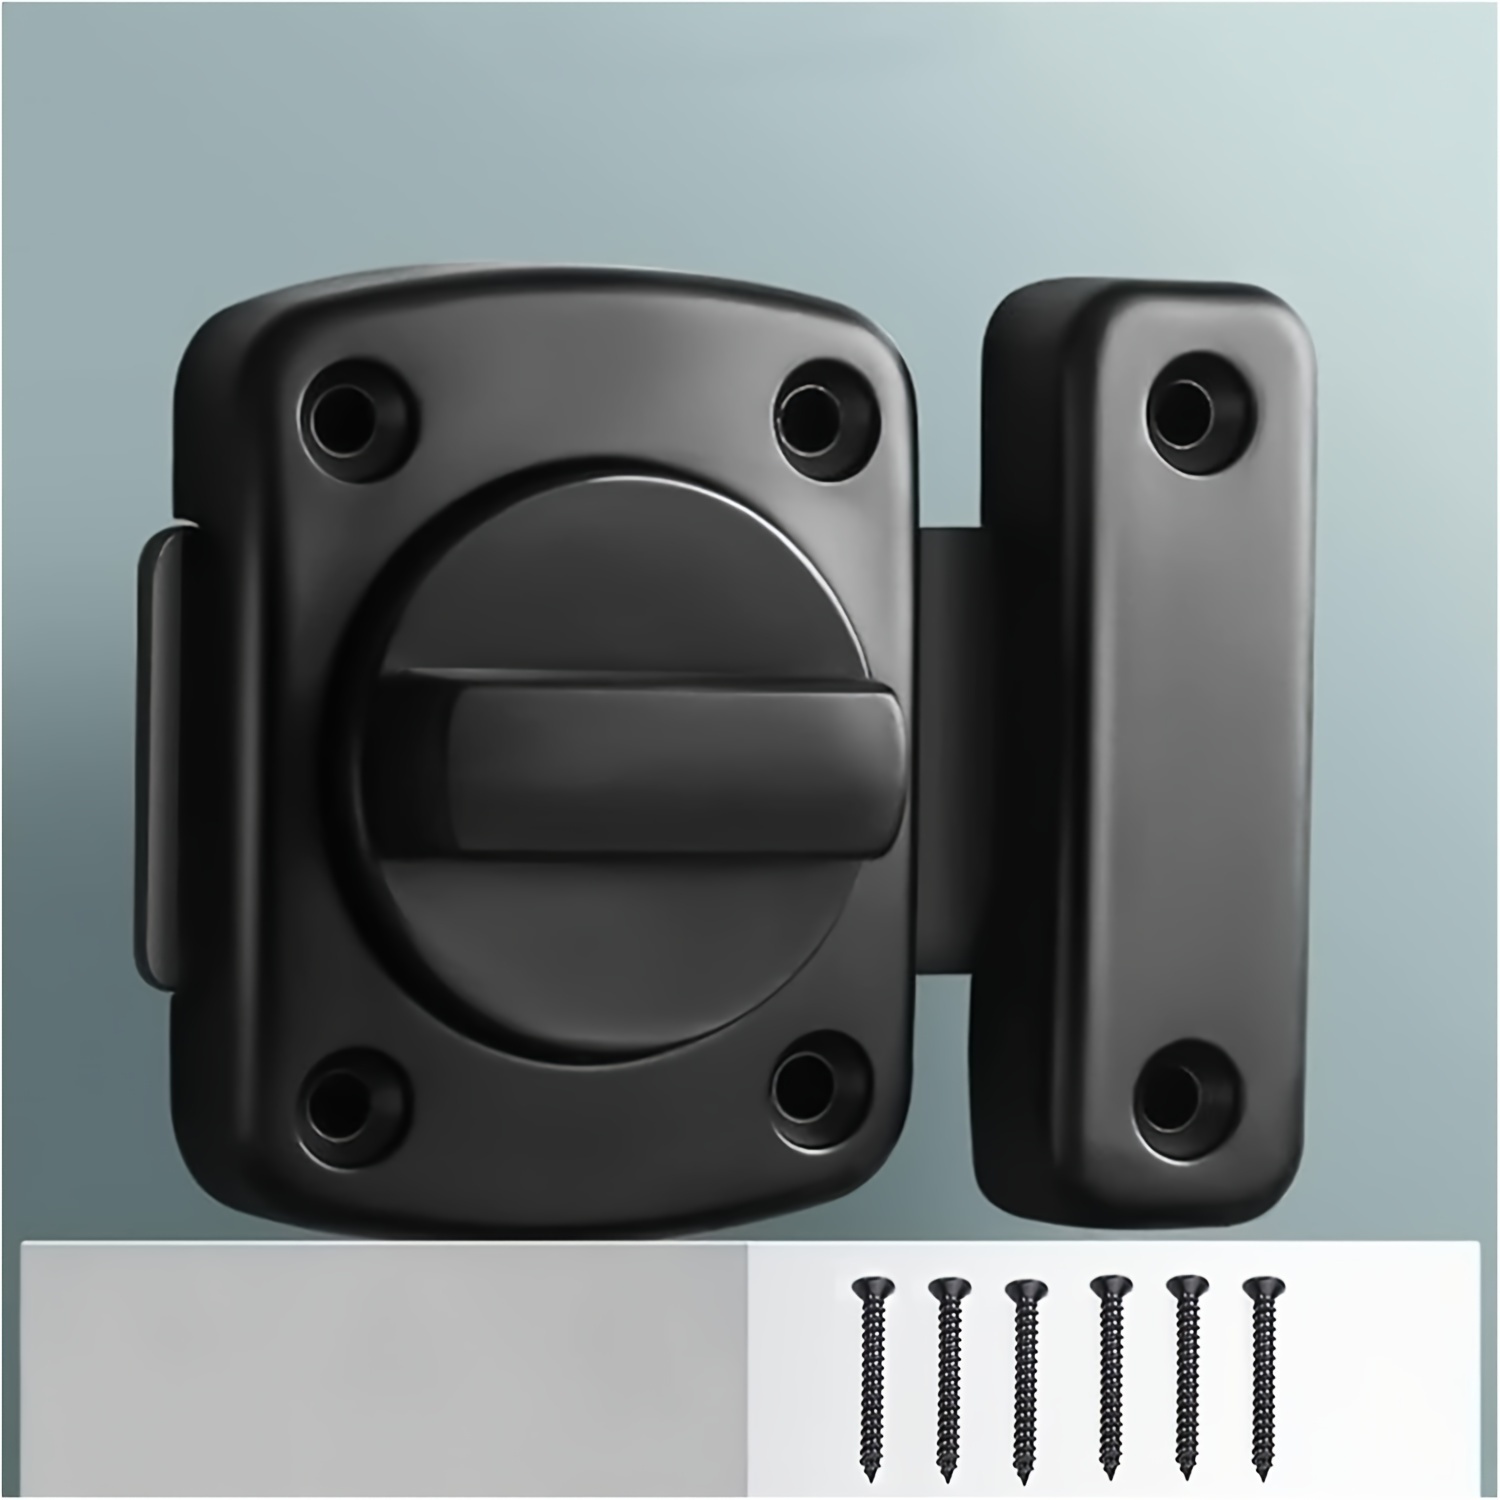 

Black Lock With Latch, Made Of Zinc Alloy, Thick Anti-theft Rotating Latch Lock, Sliding Lock For Bedroom Dormitory Rental Black